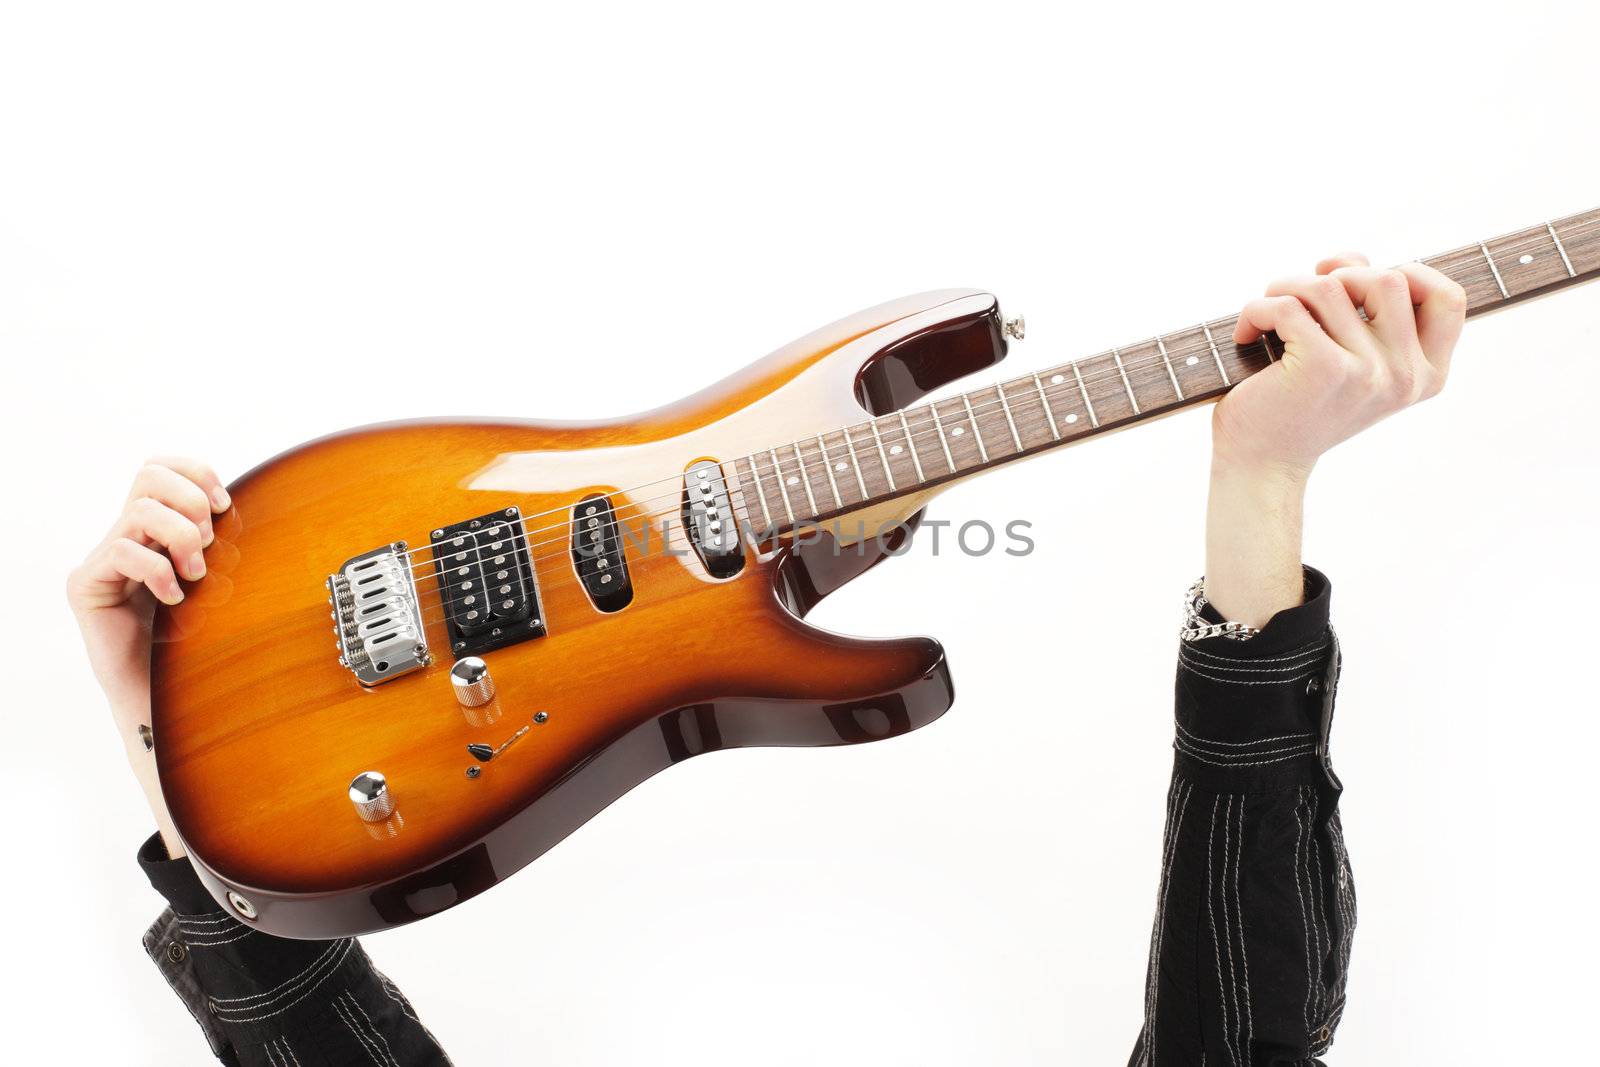 guitarist rock star isolated on white background